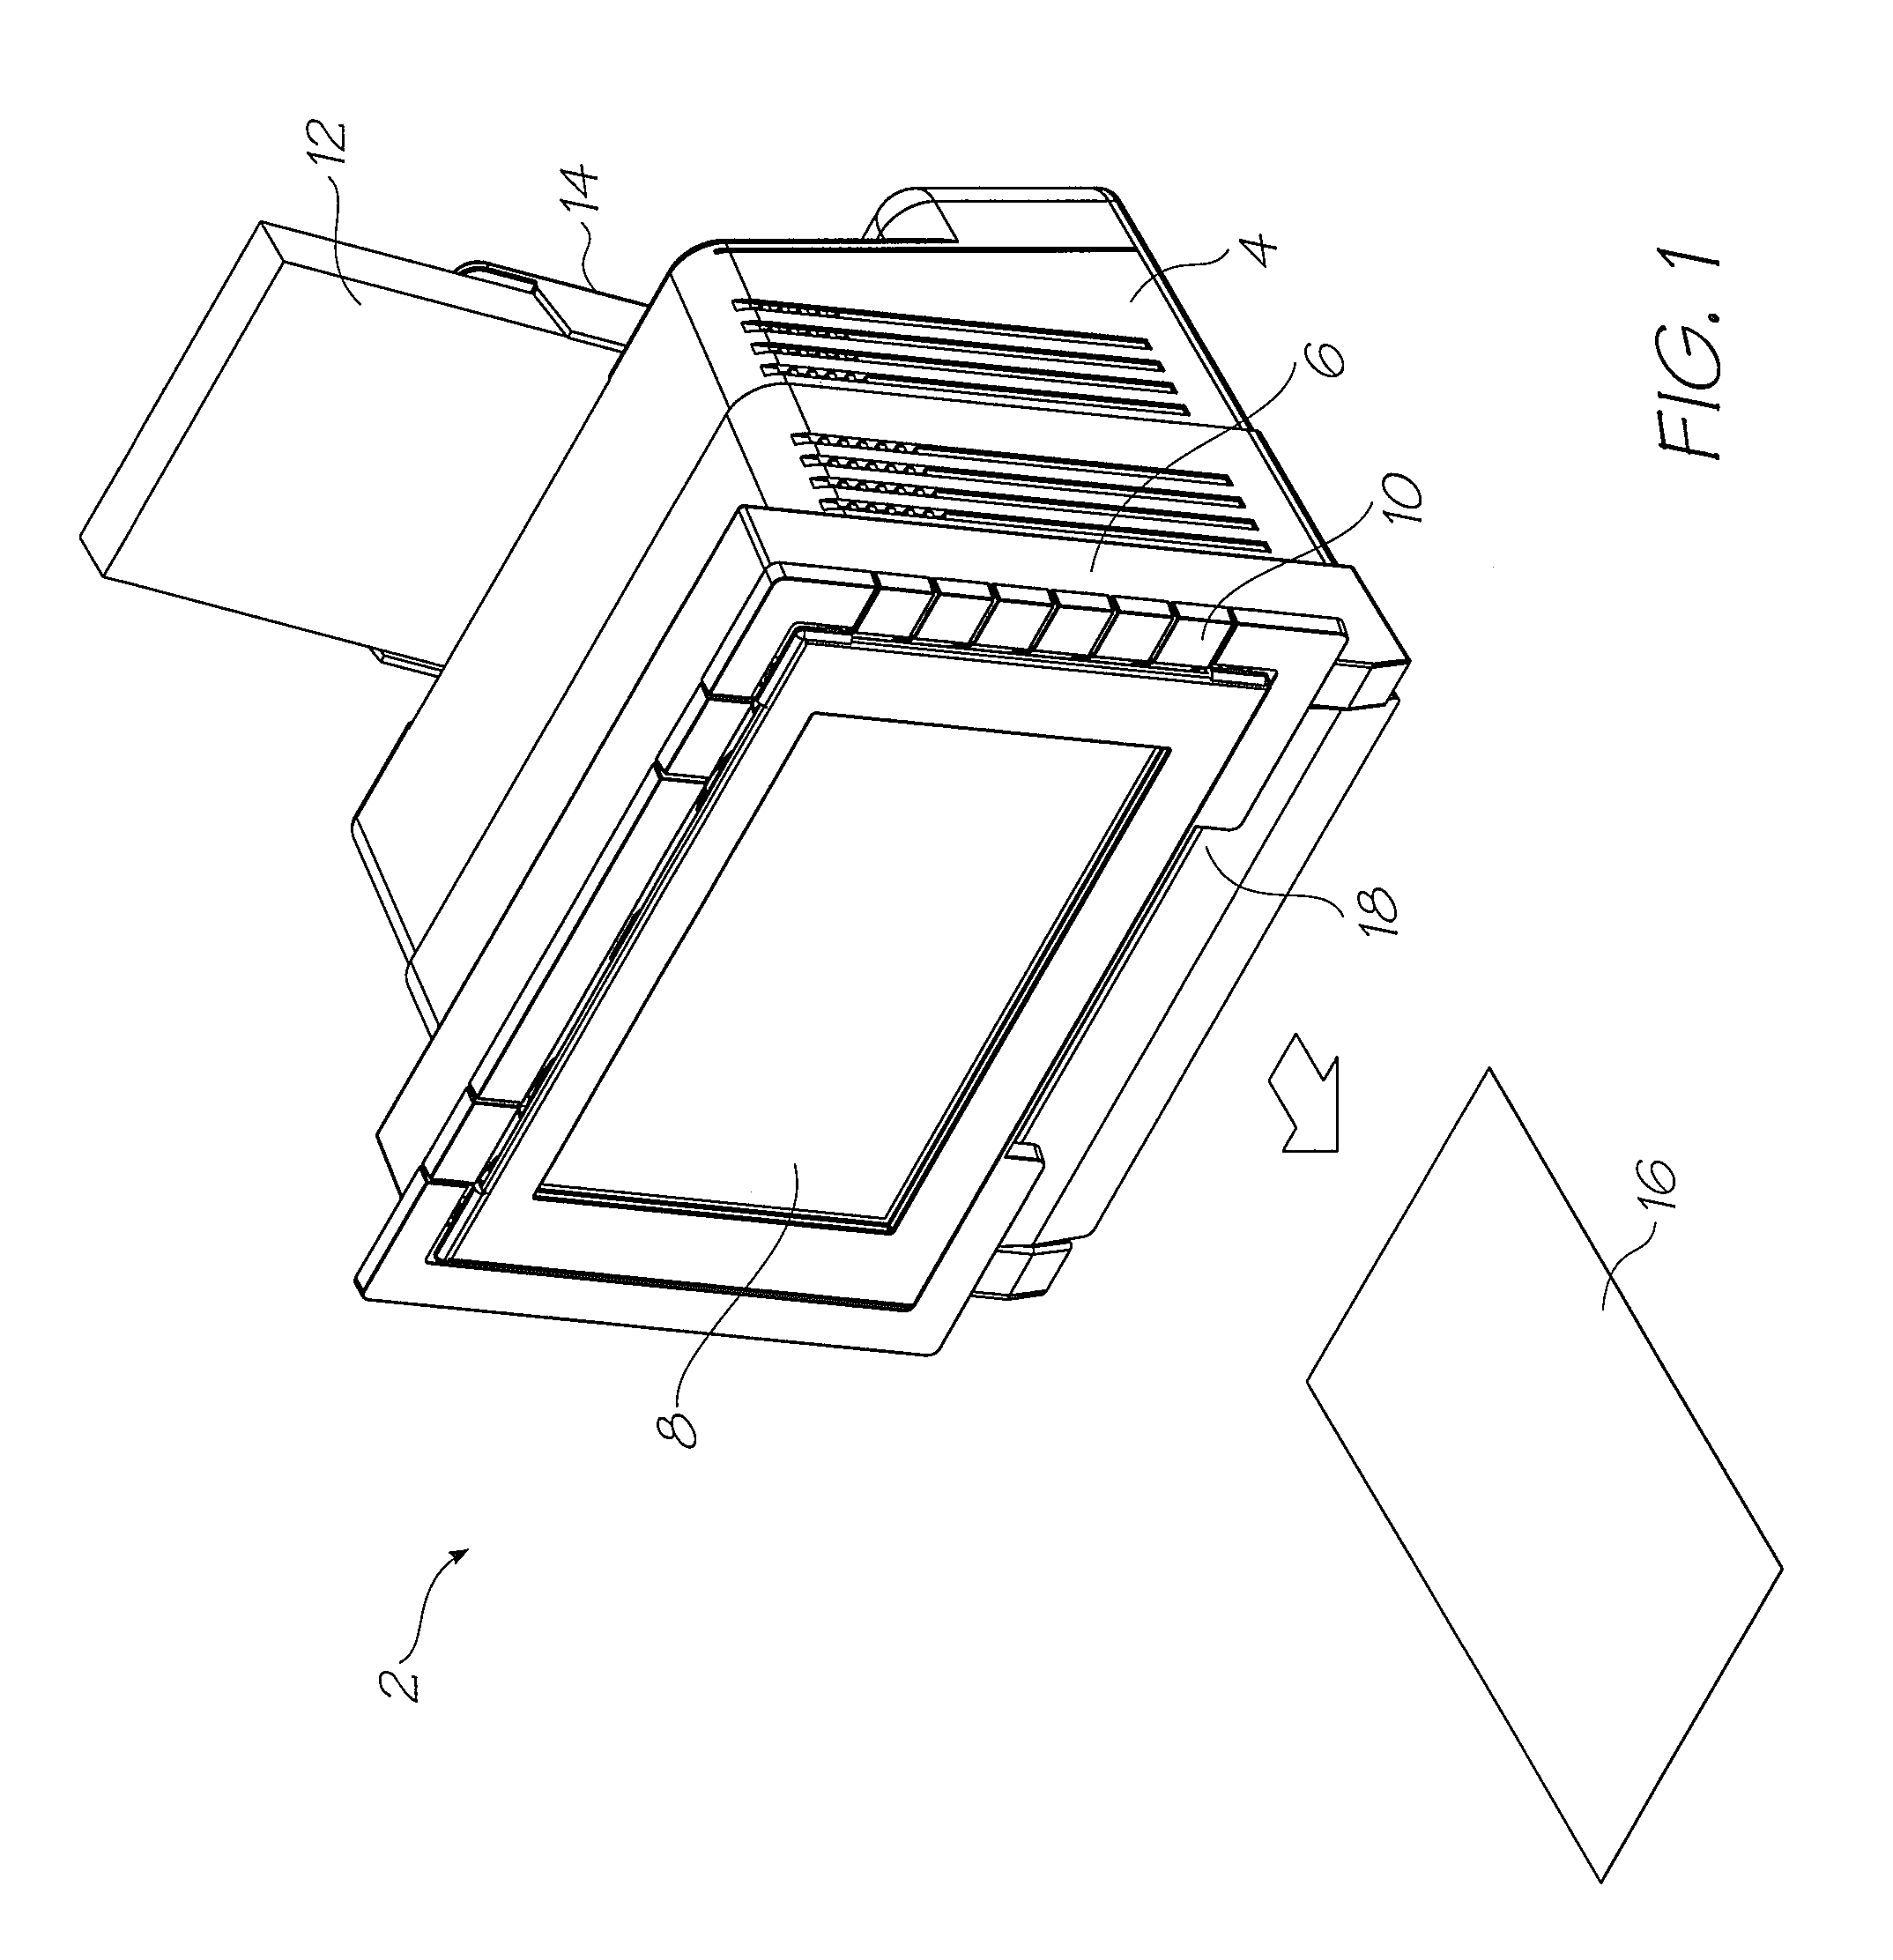 Printhead with non-priming cavities for pulse damping